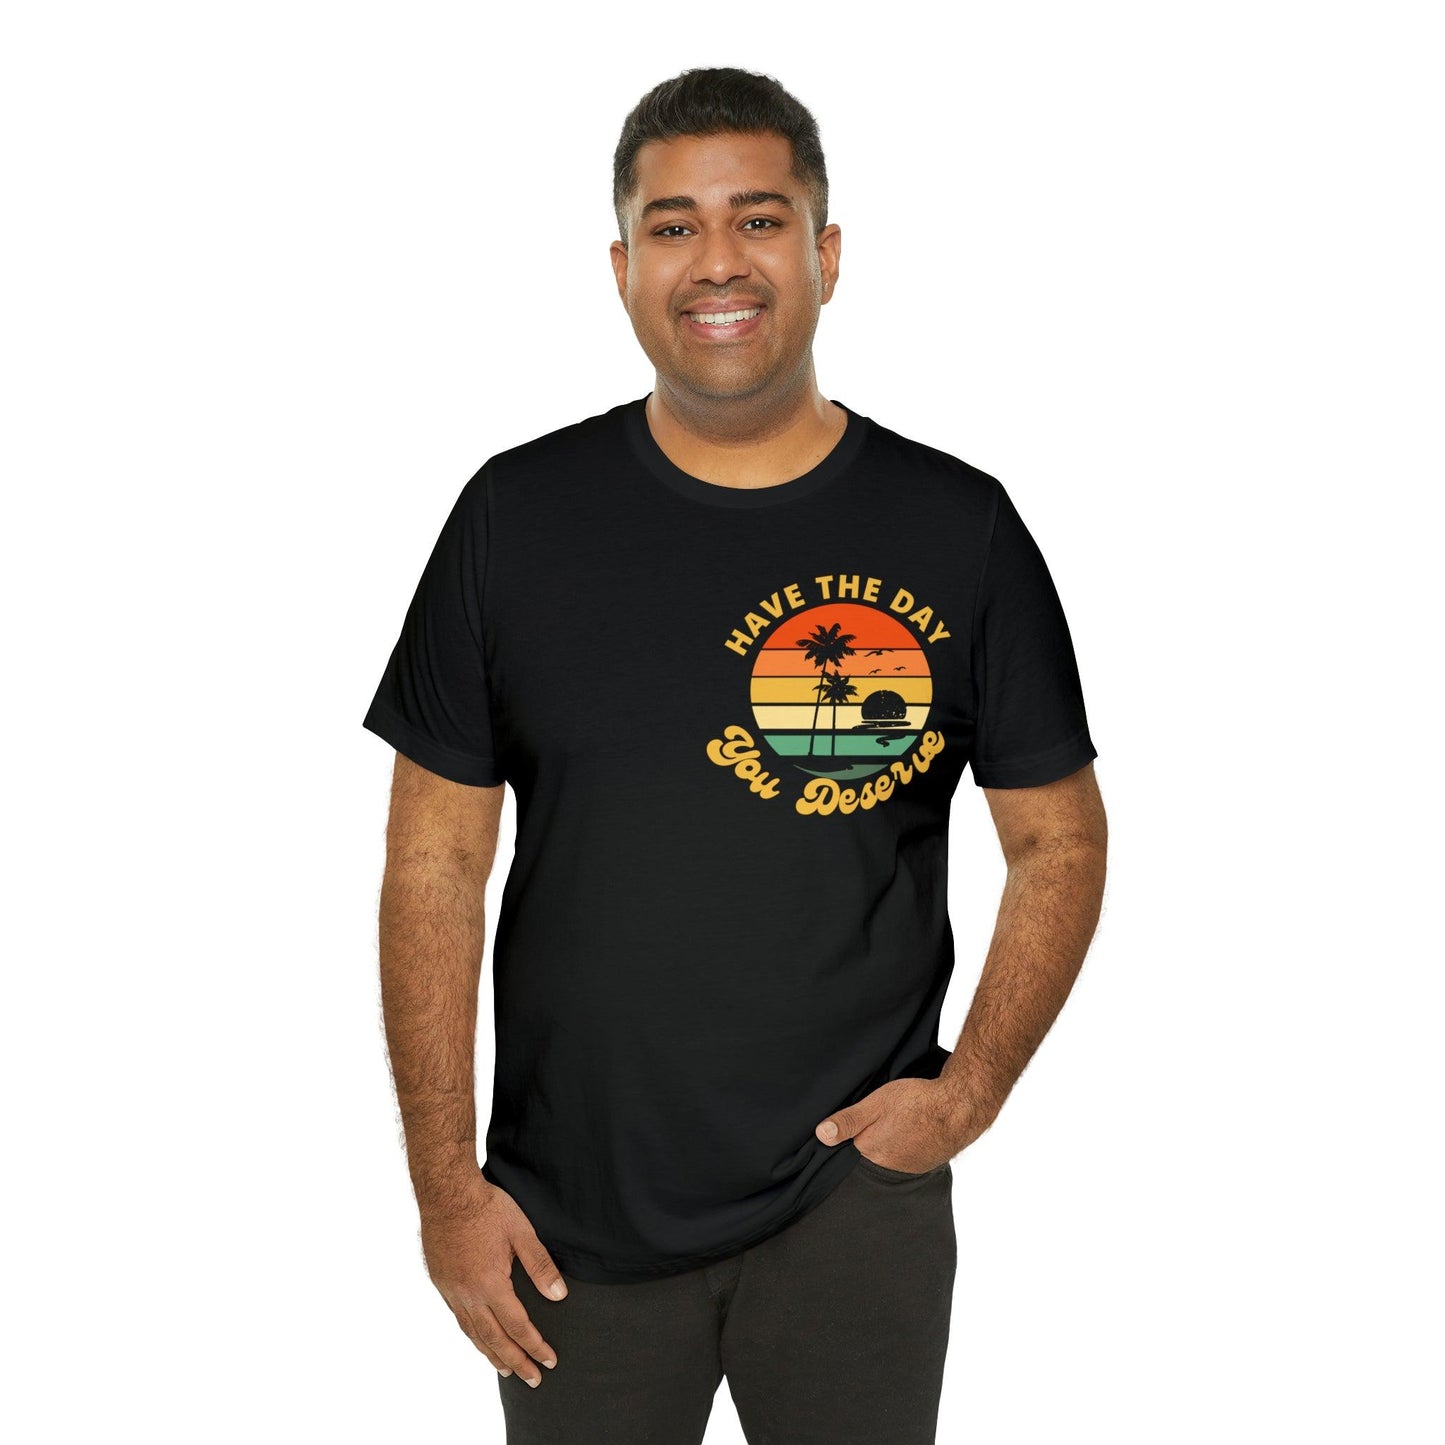 Have the Day You Deserve Shirt, Inspirational Graphic Tee, Motivational Tee, Positive Vibes Shirt, Trendy shirt and Vintage shirt - Giftsmojo